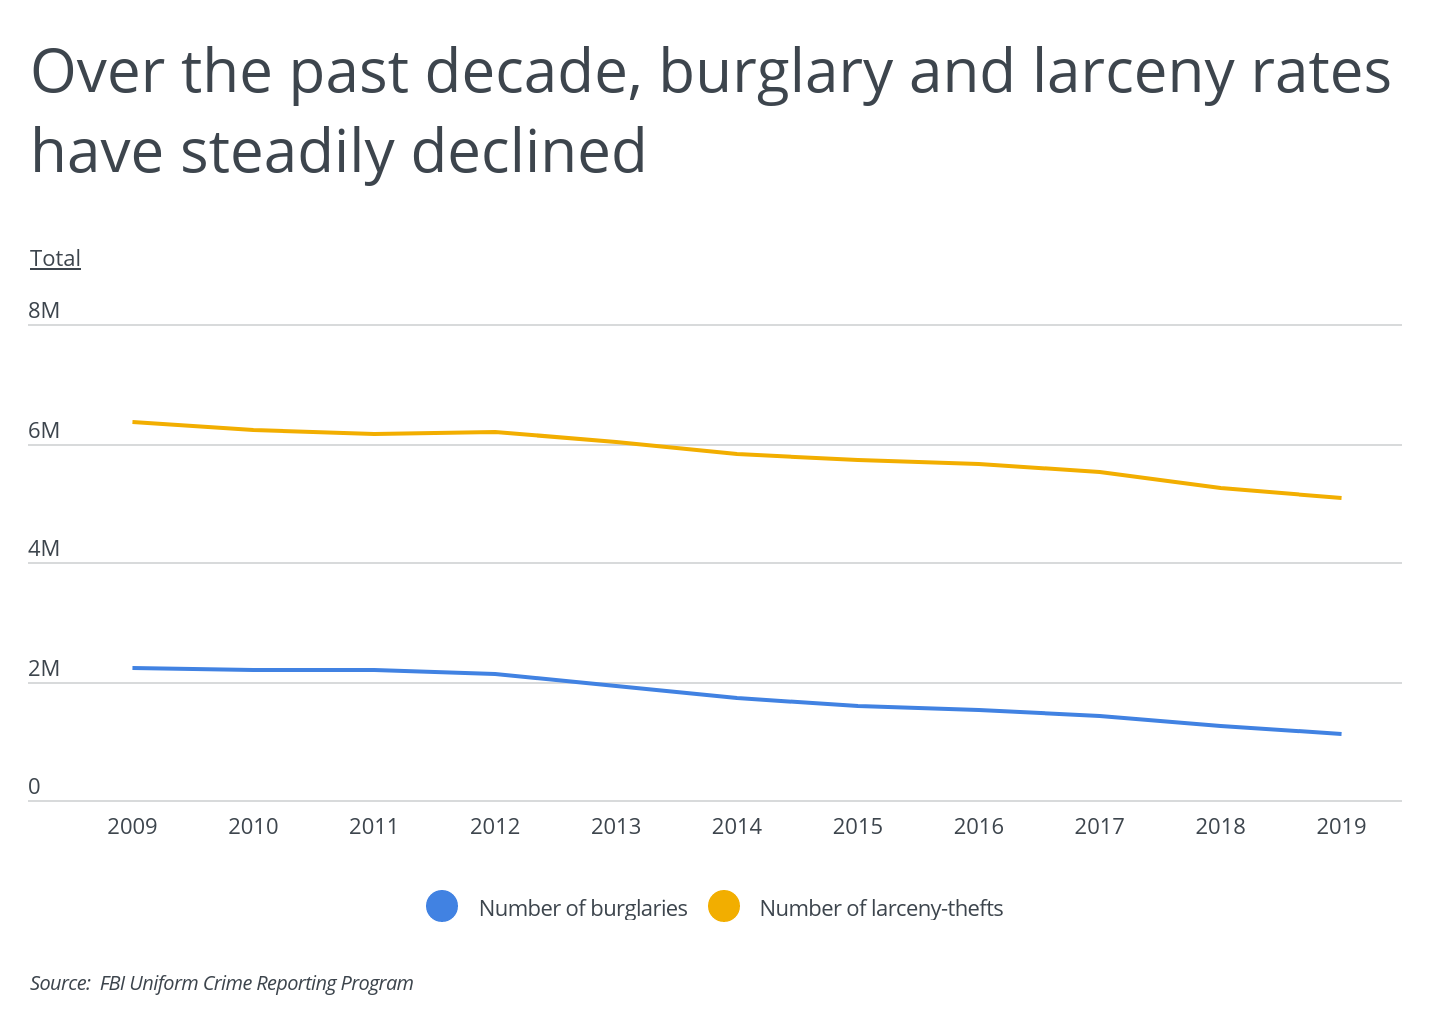 Over the past decade, burglary and larceny rates have steadily declined